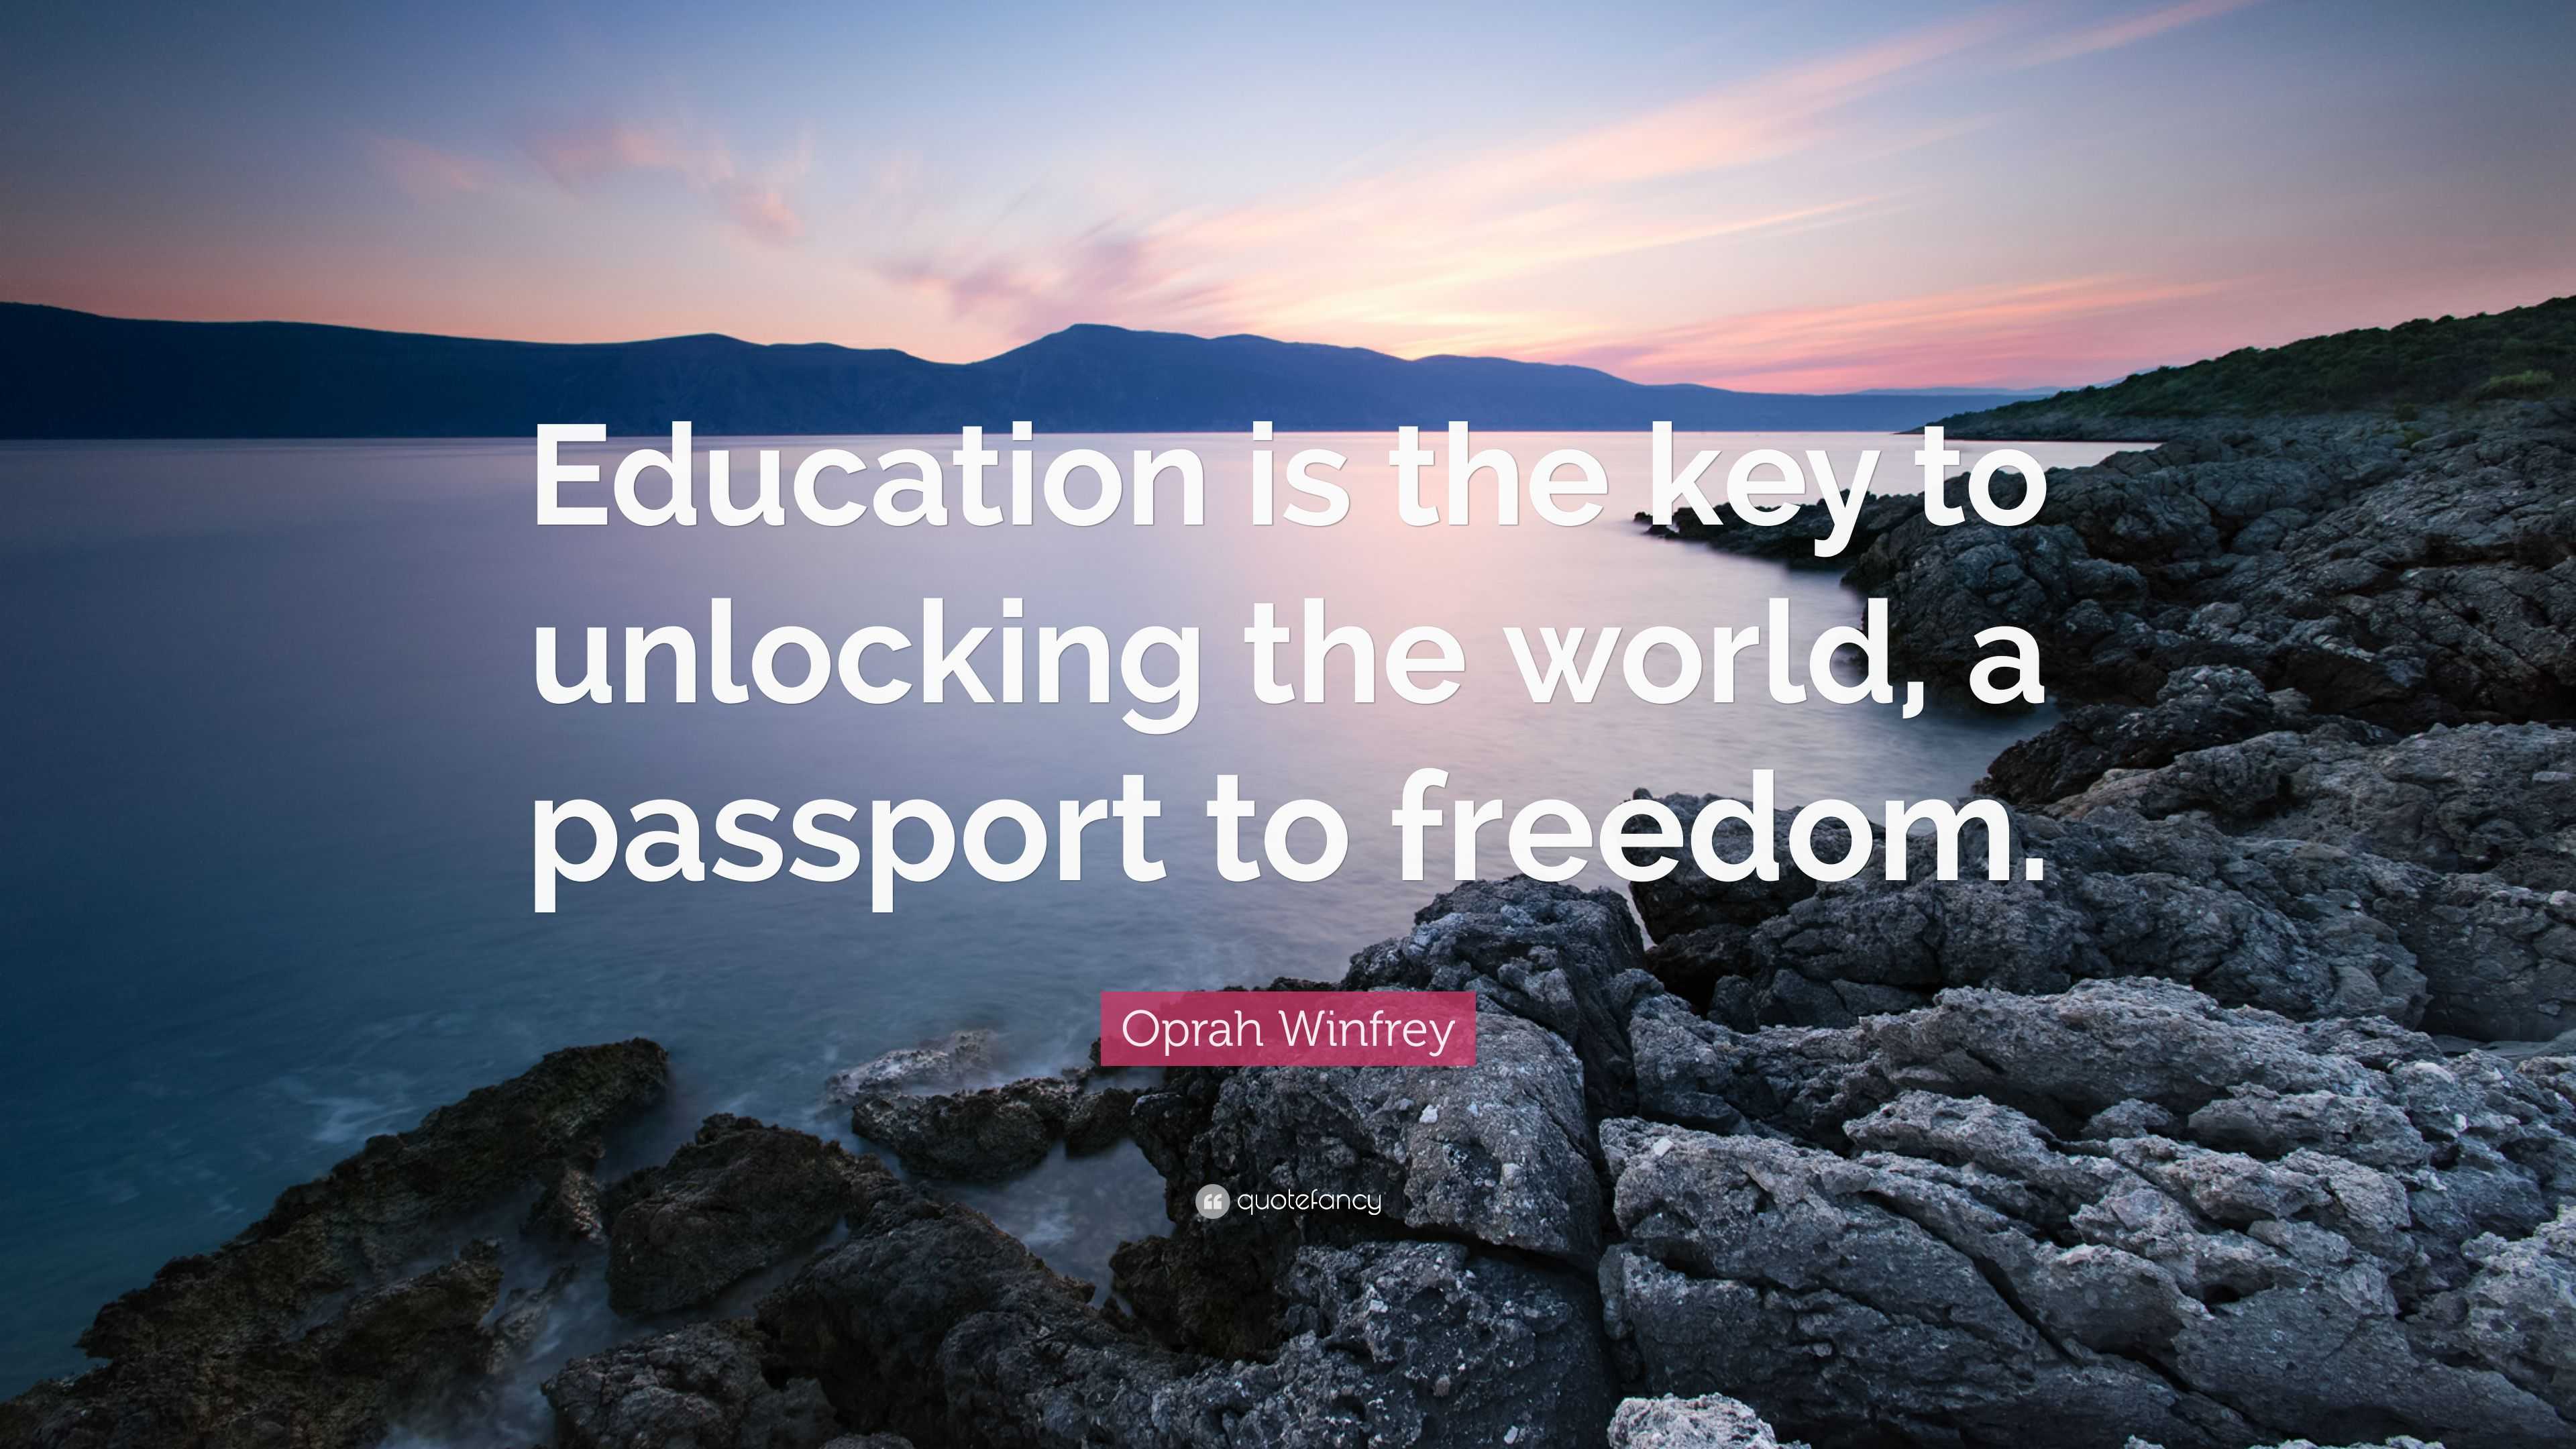 Oprah Winfrey Quote: "Education is the key to unlocking ...